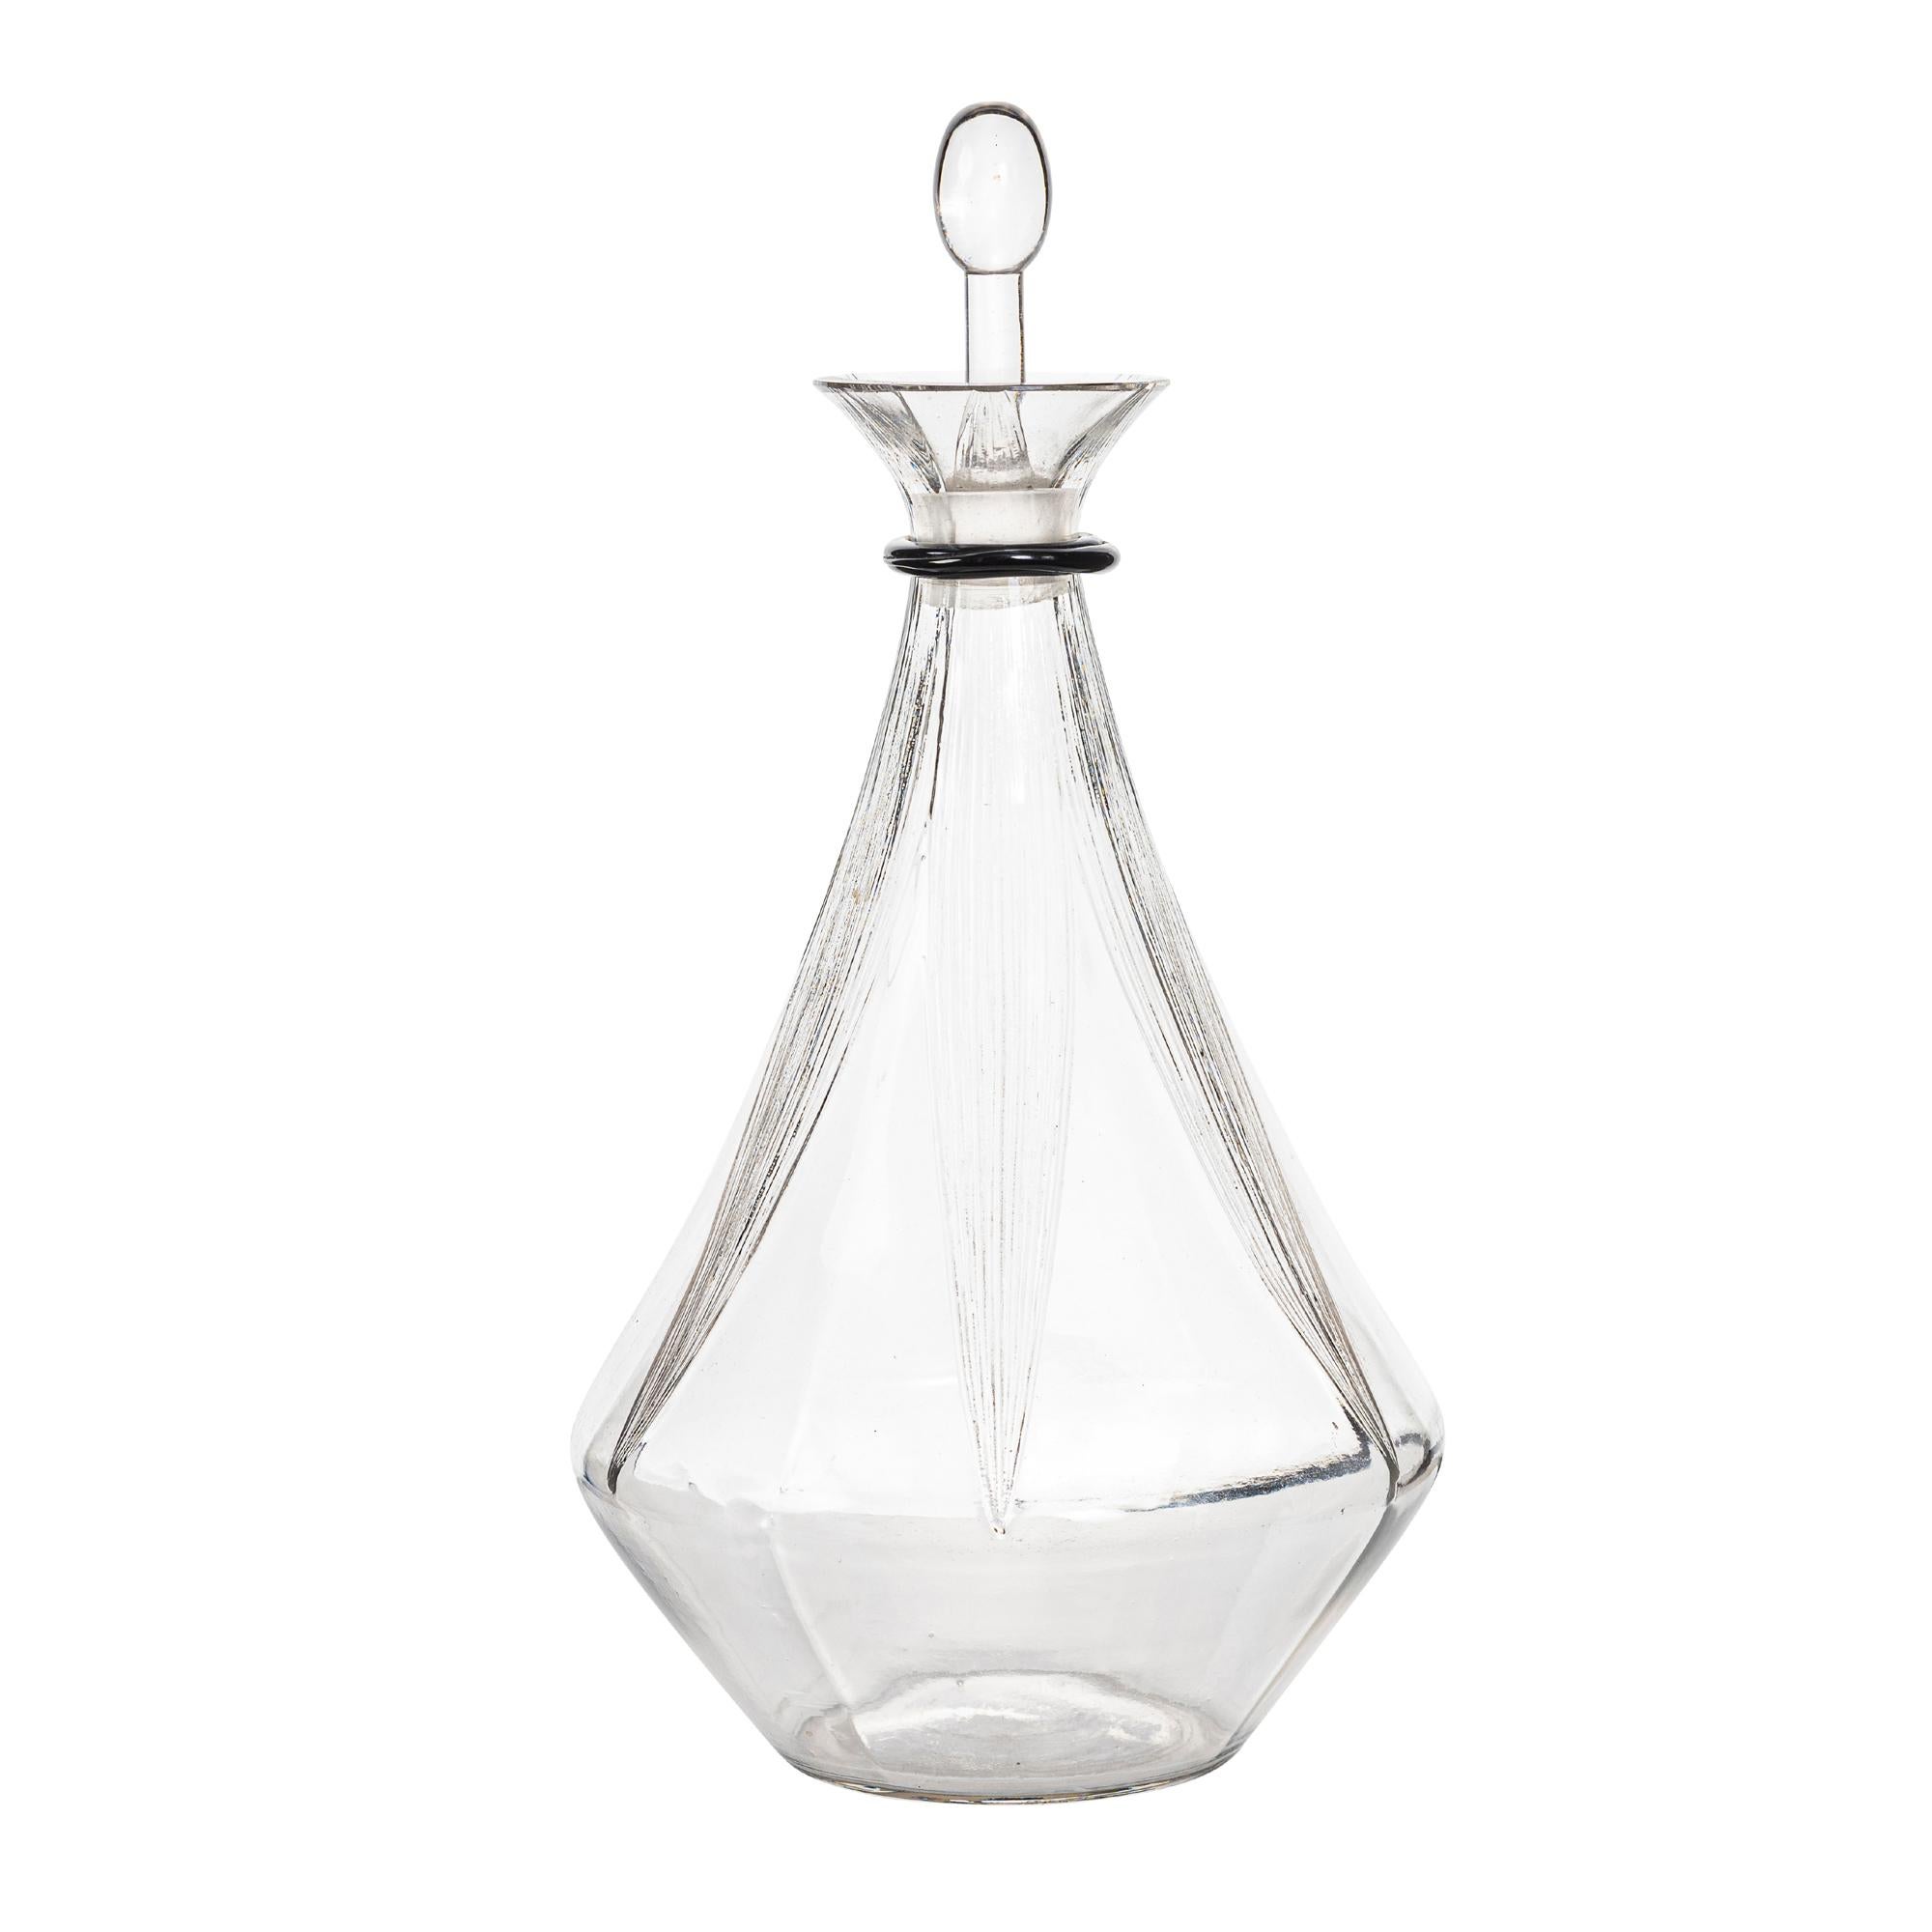 R. Lalique Molded Glass Decanter in the 'Selestat' Pattern For Sale 1